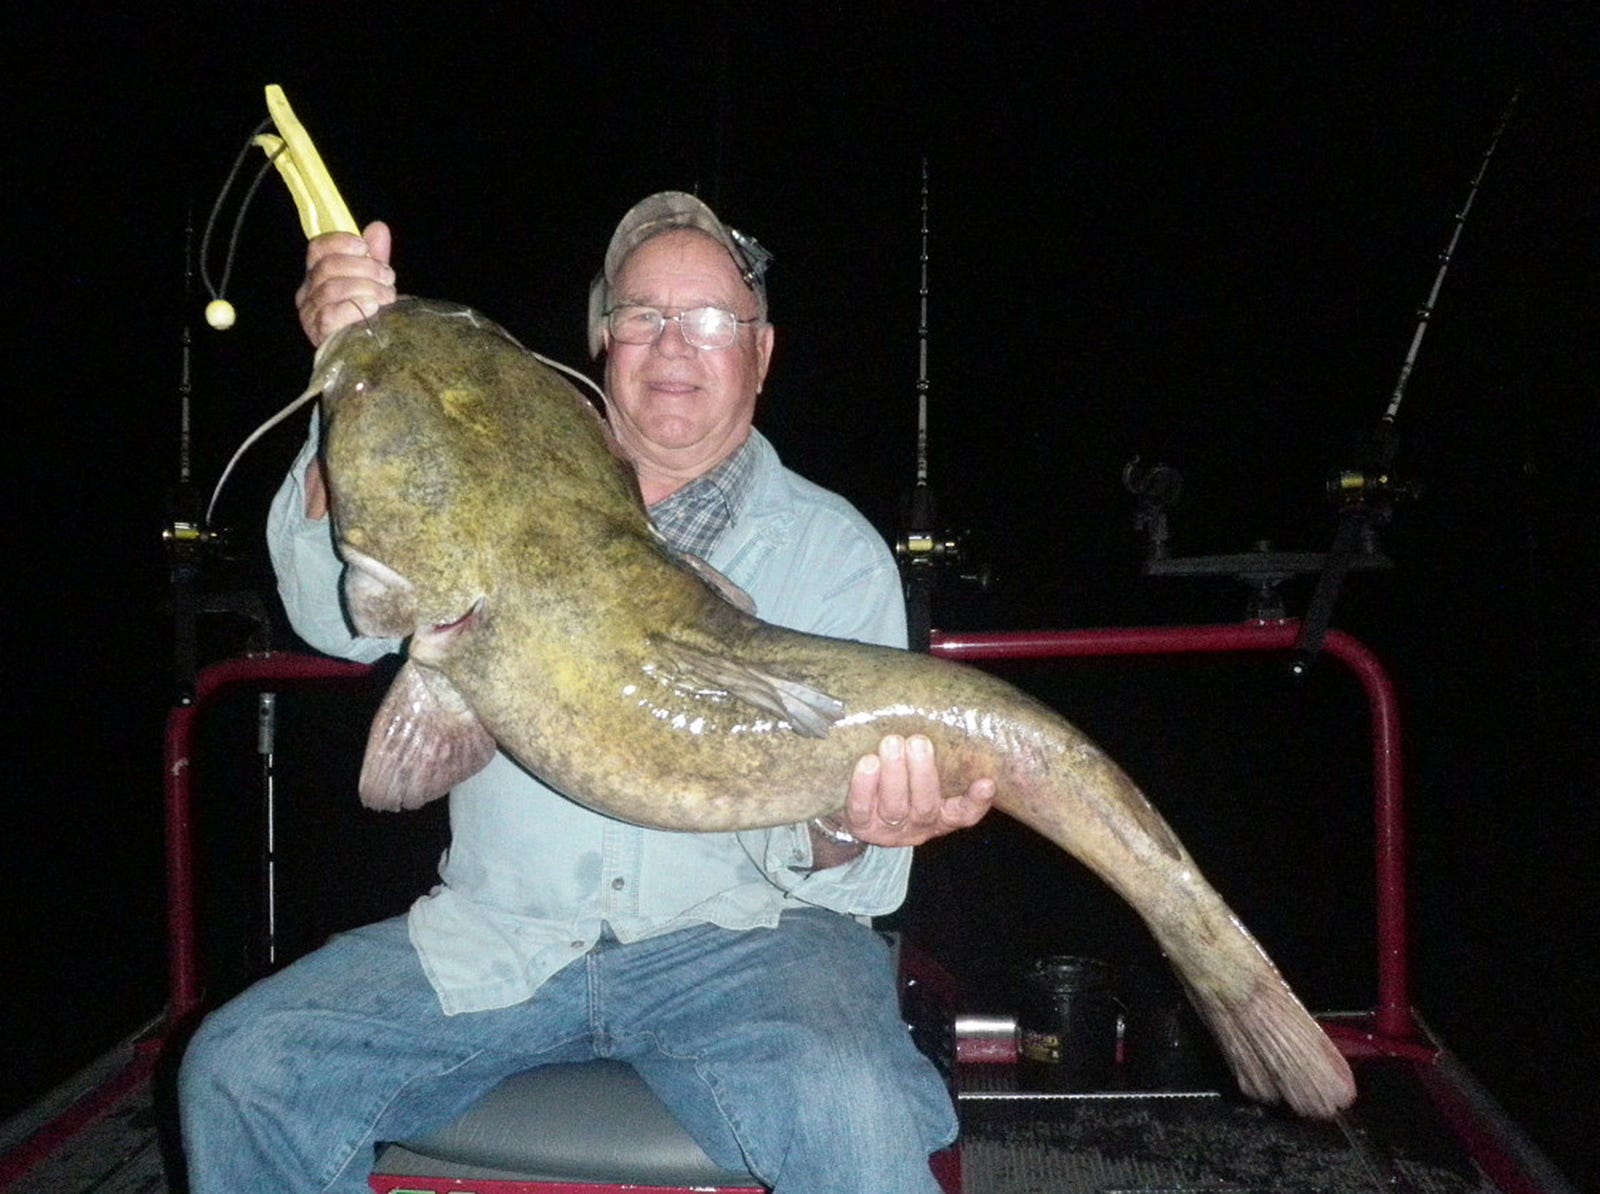 Flathead catfish: Fishing for monsters in the Susquehanna River